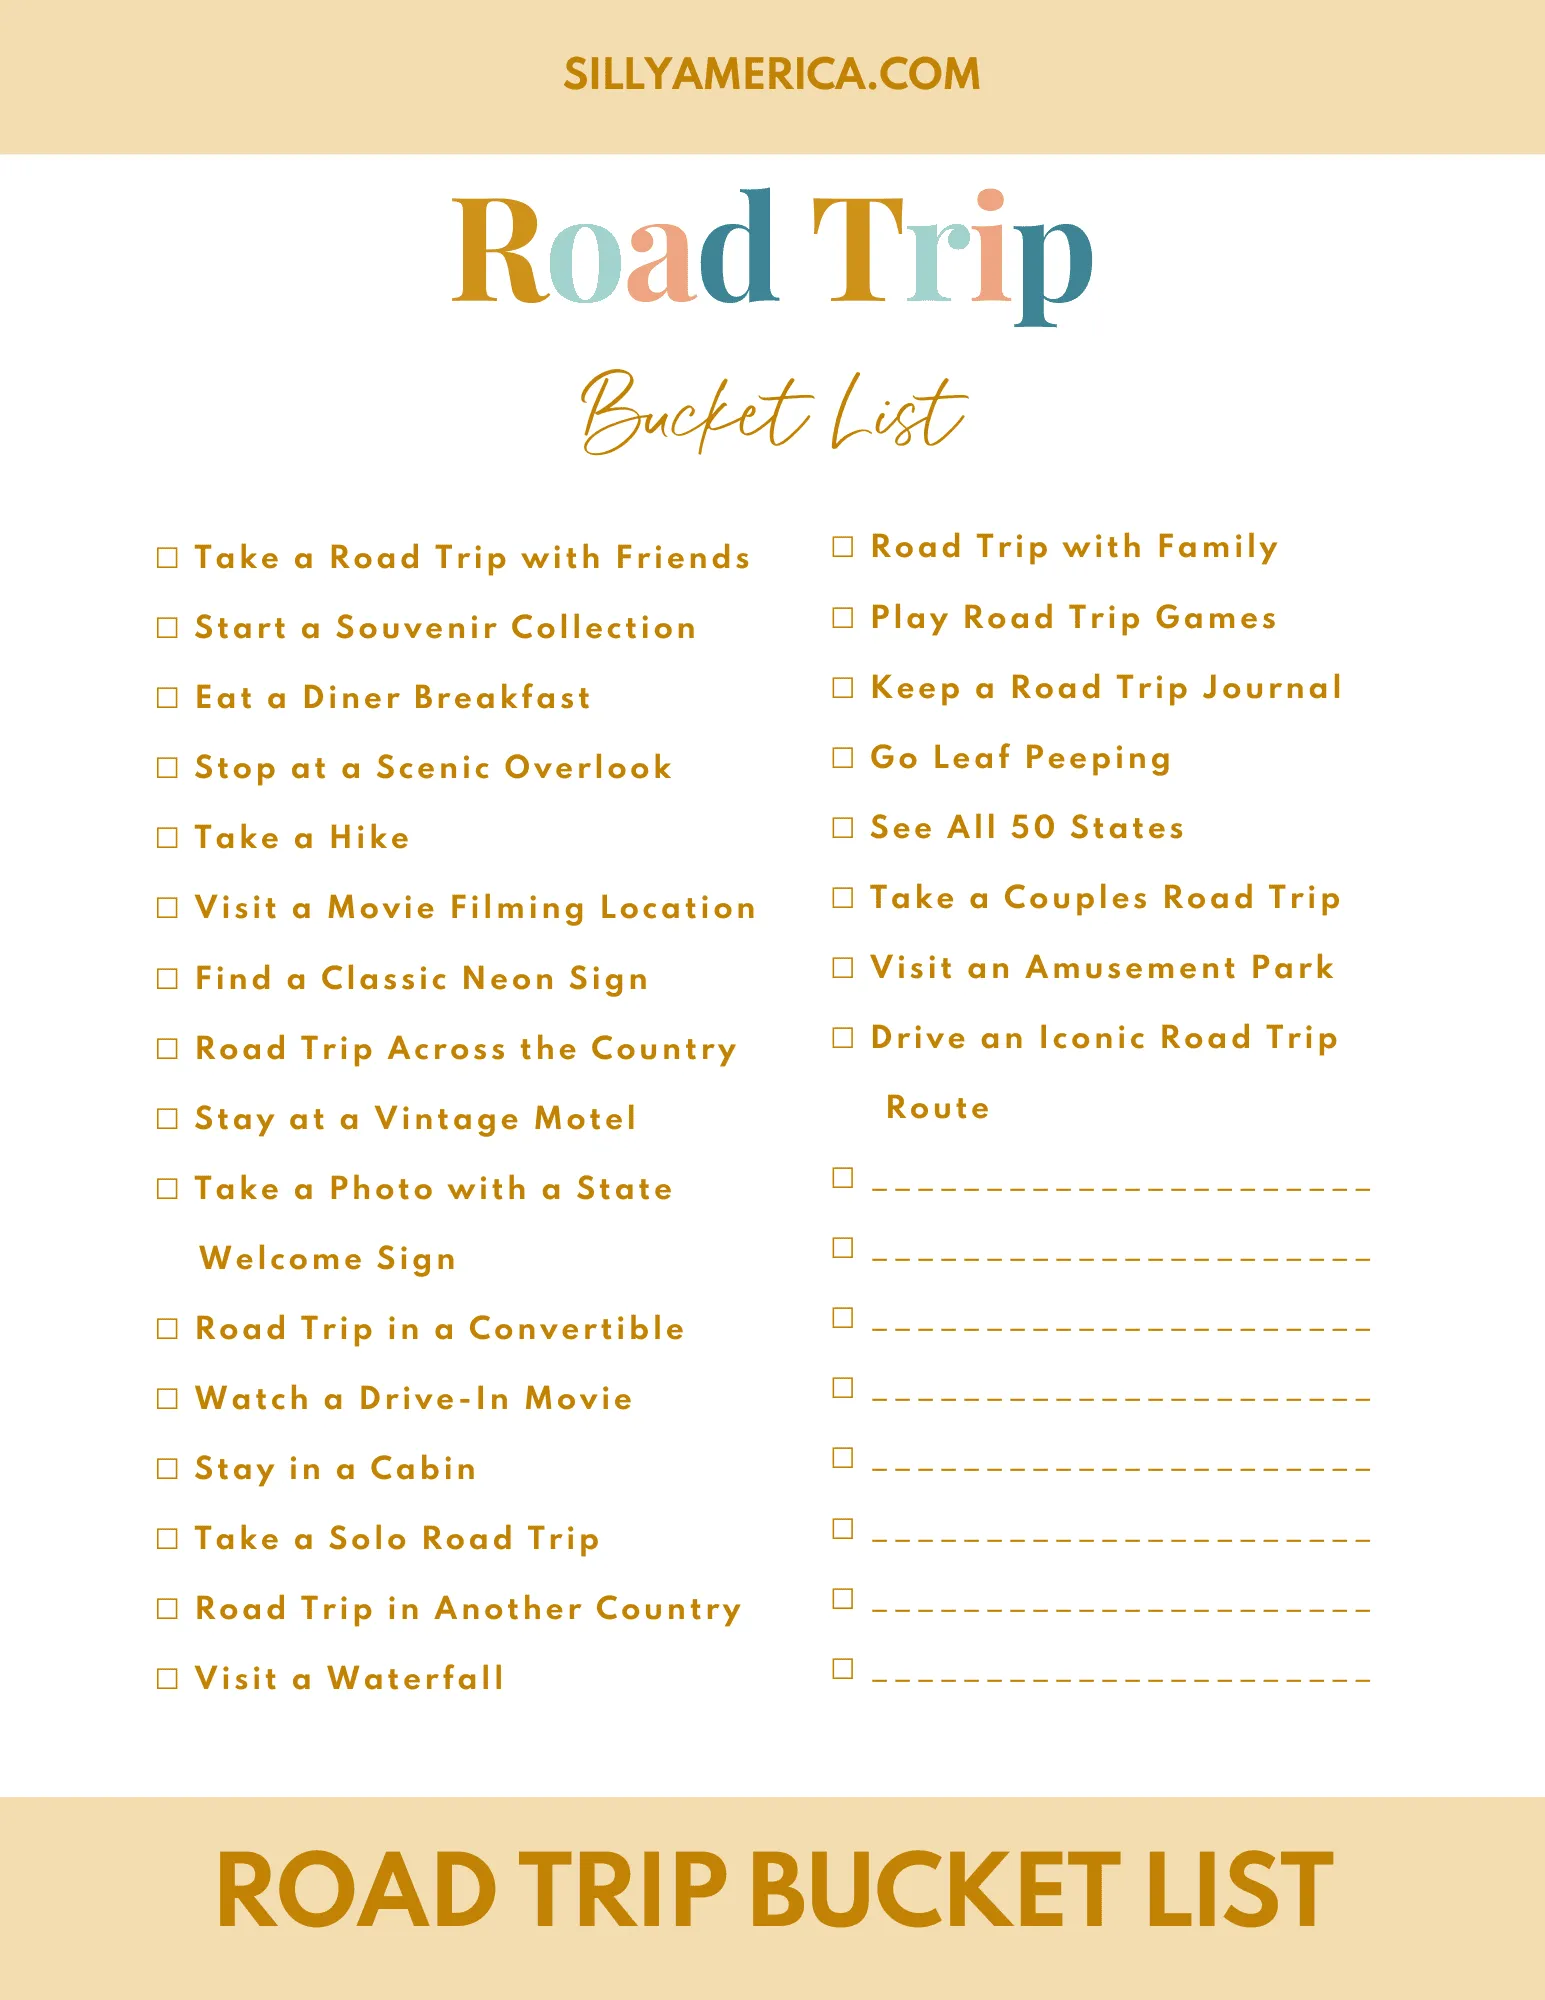 More Things to Add to Your Road Trip Bucket List Checklist